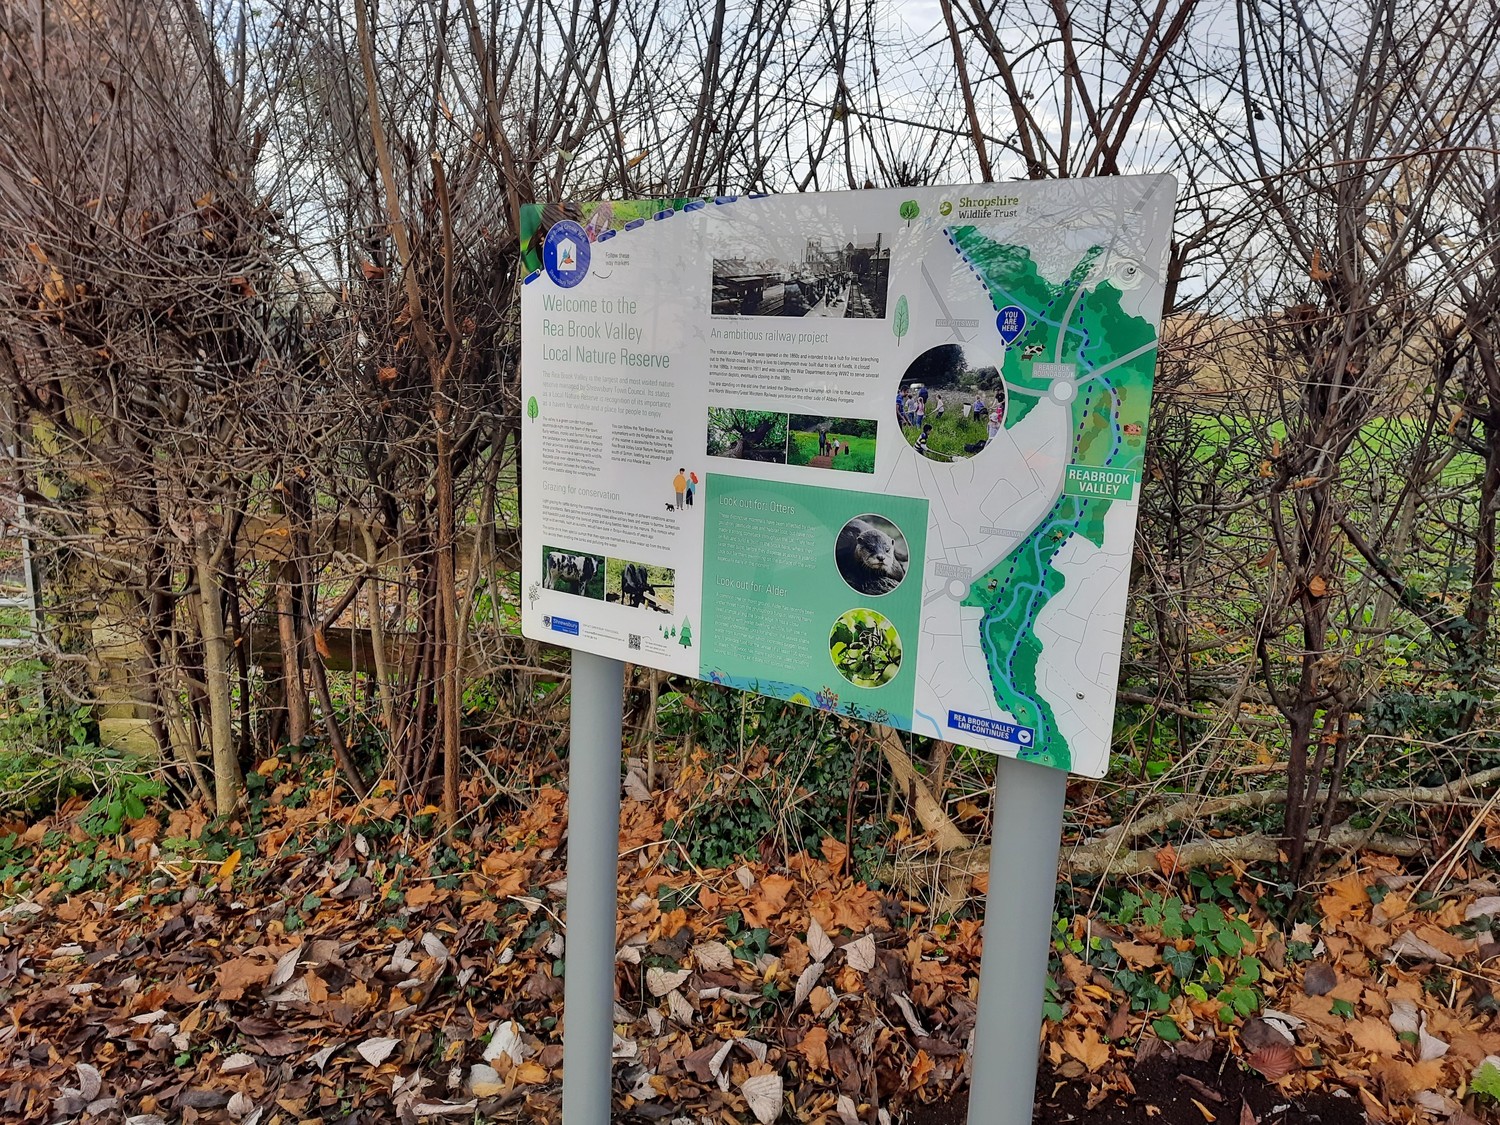 One of the Boards at Rea Brook Valley Nature Reserve